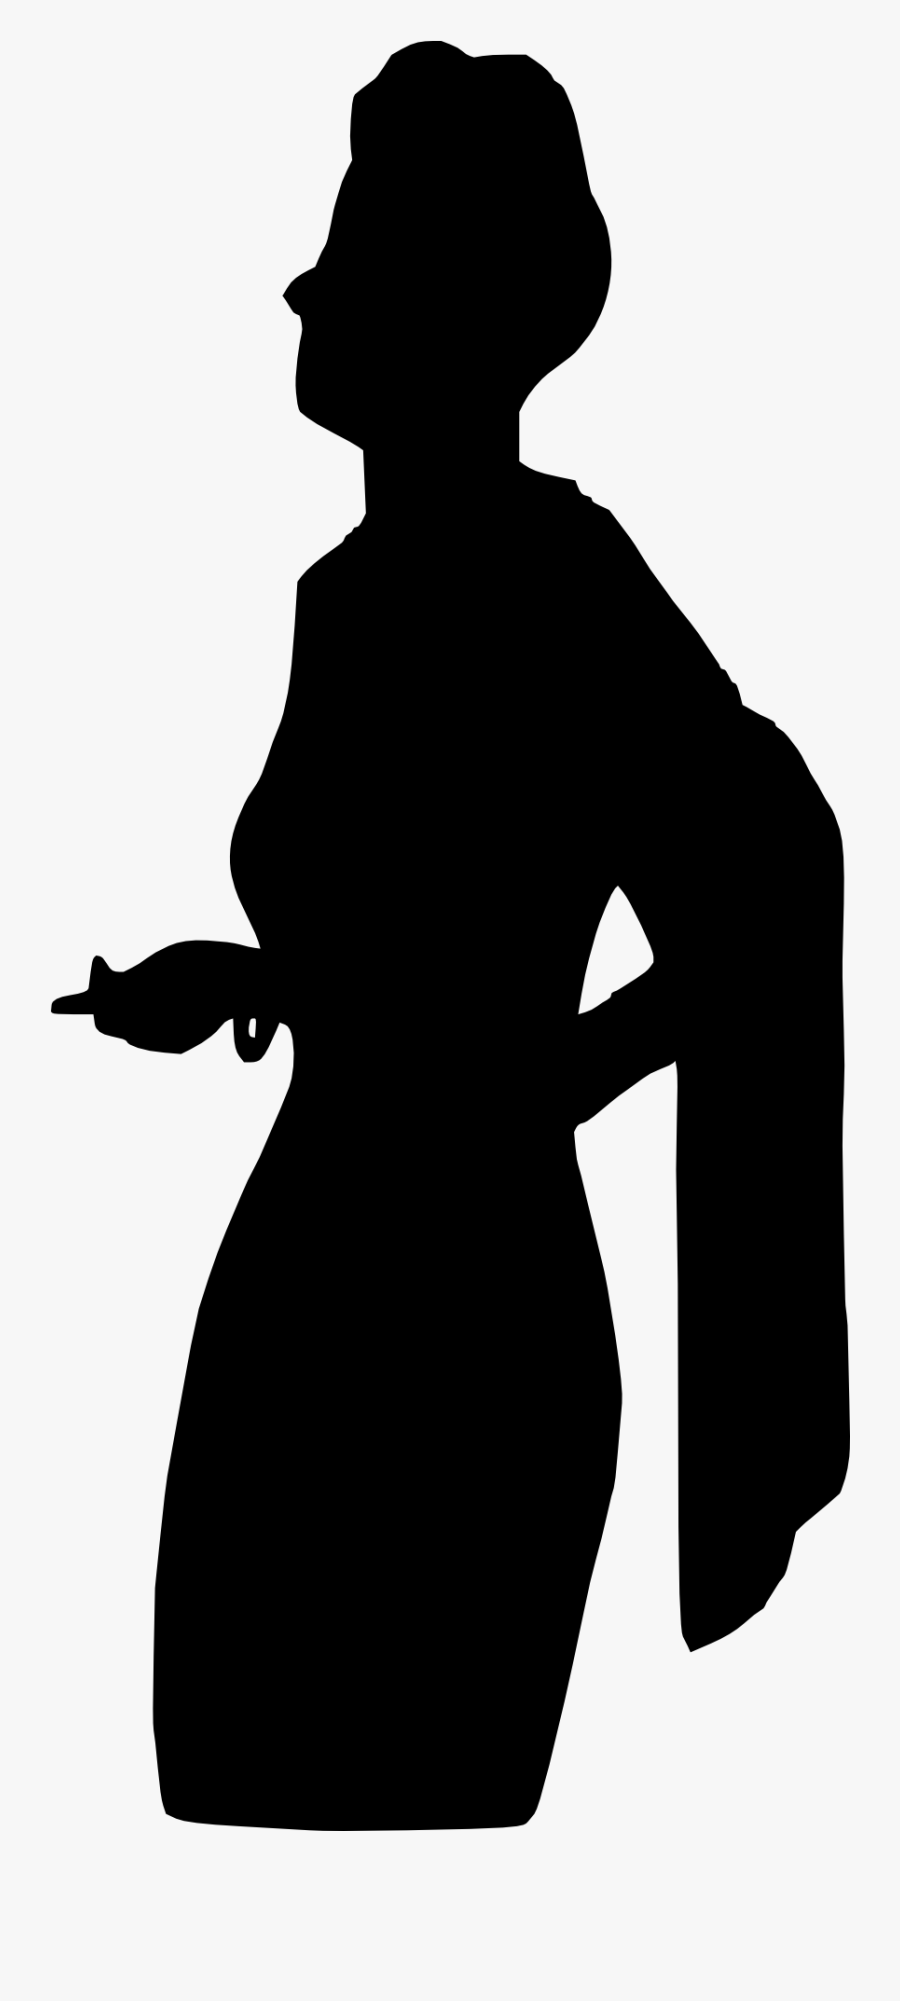 Old Woman Silhouette Png, Transparent Clipart